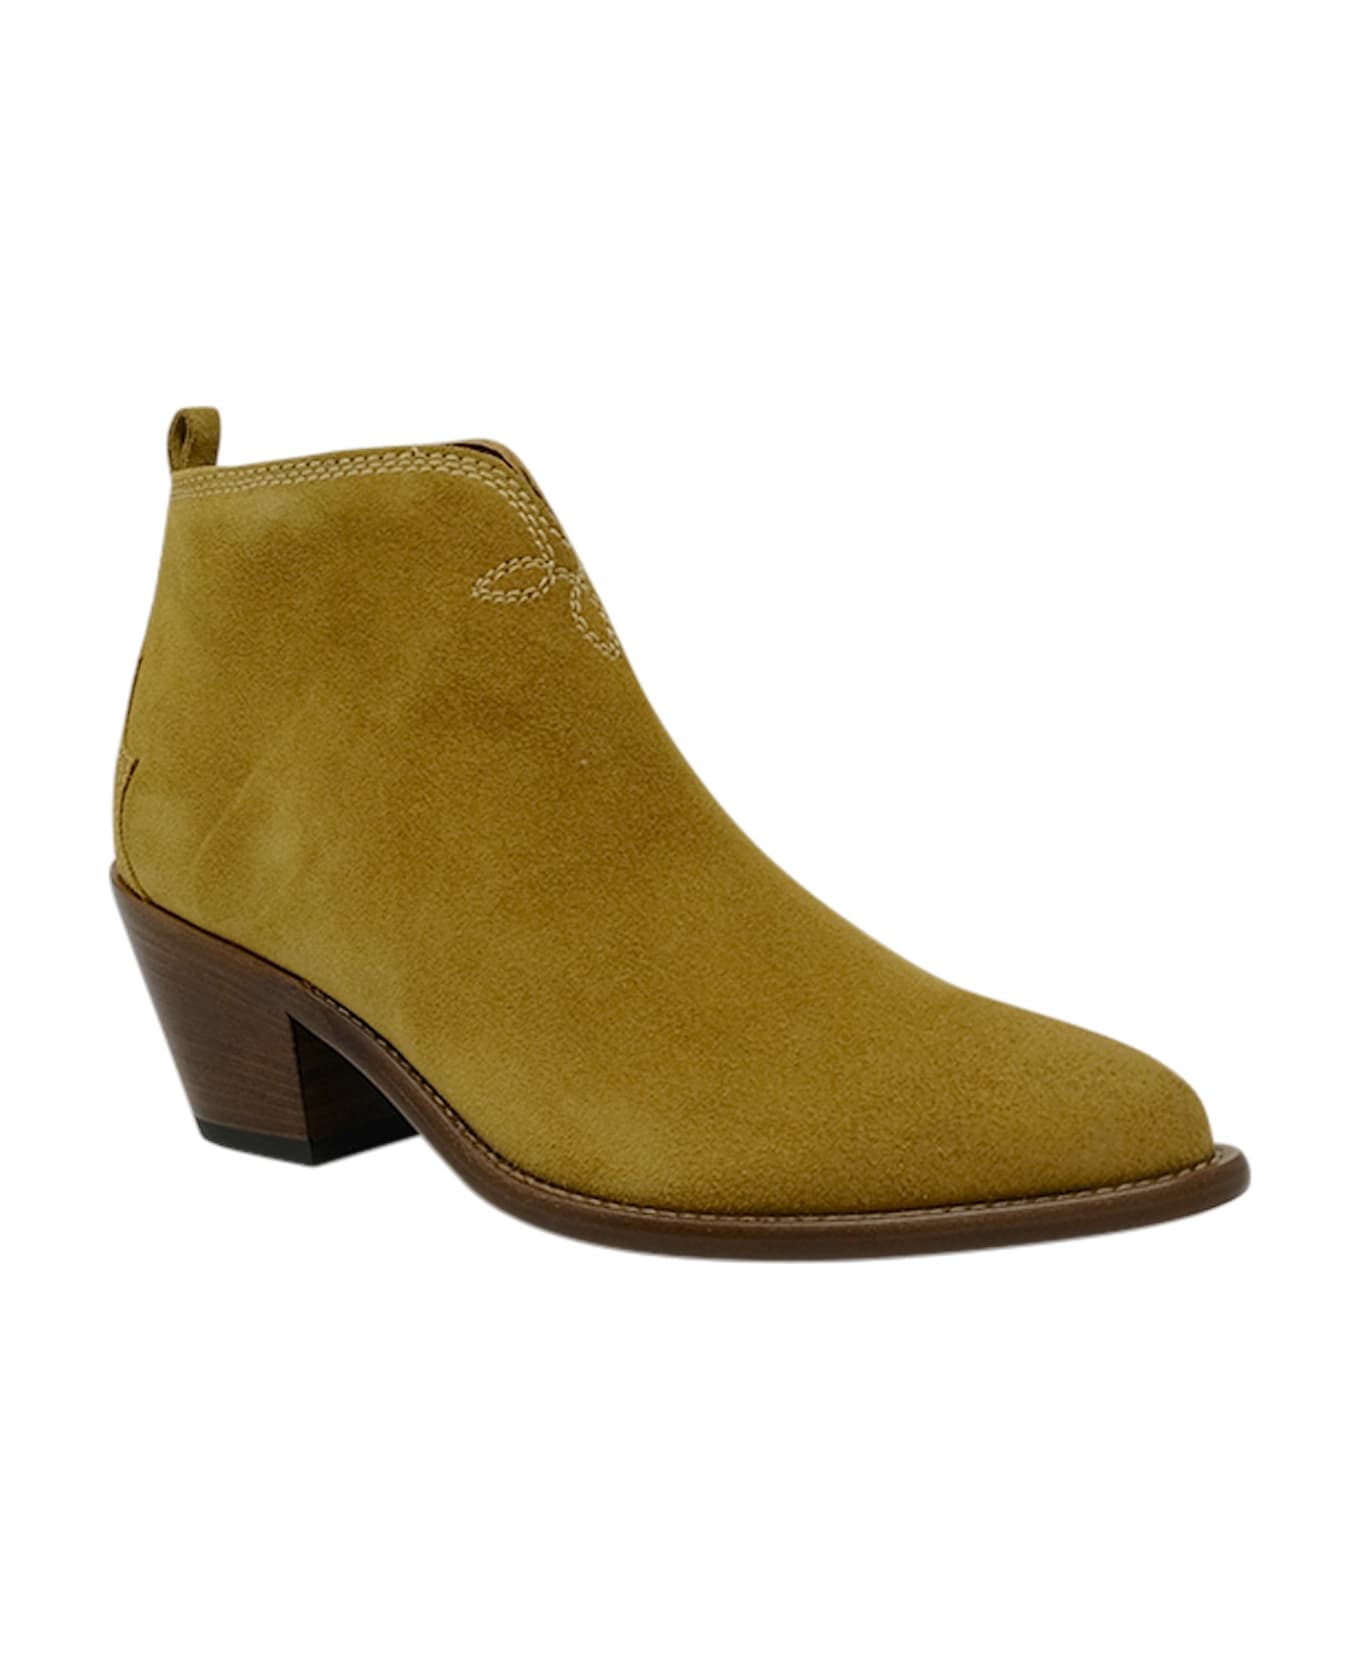 Sartore Suede Beige Ankle Boots ブーツ